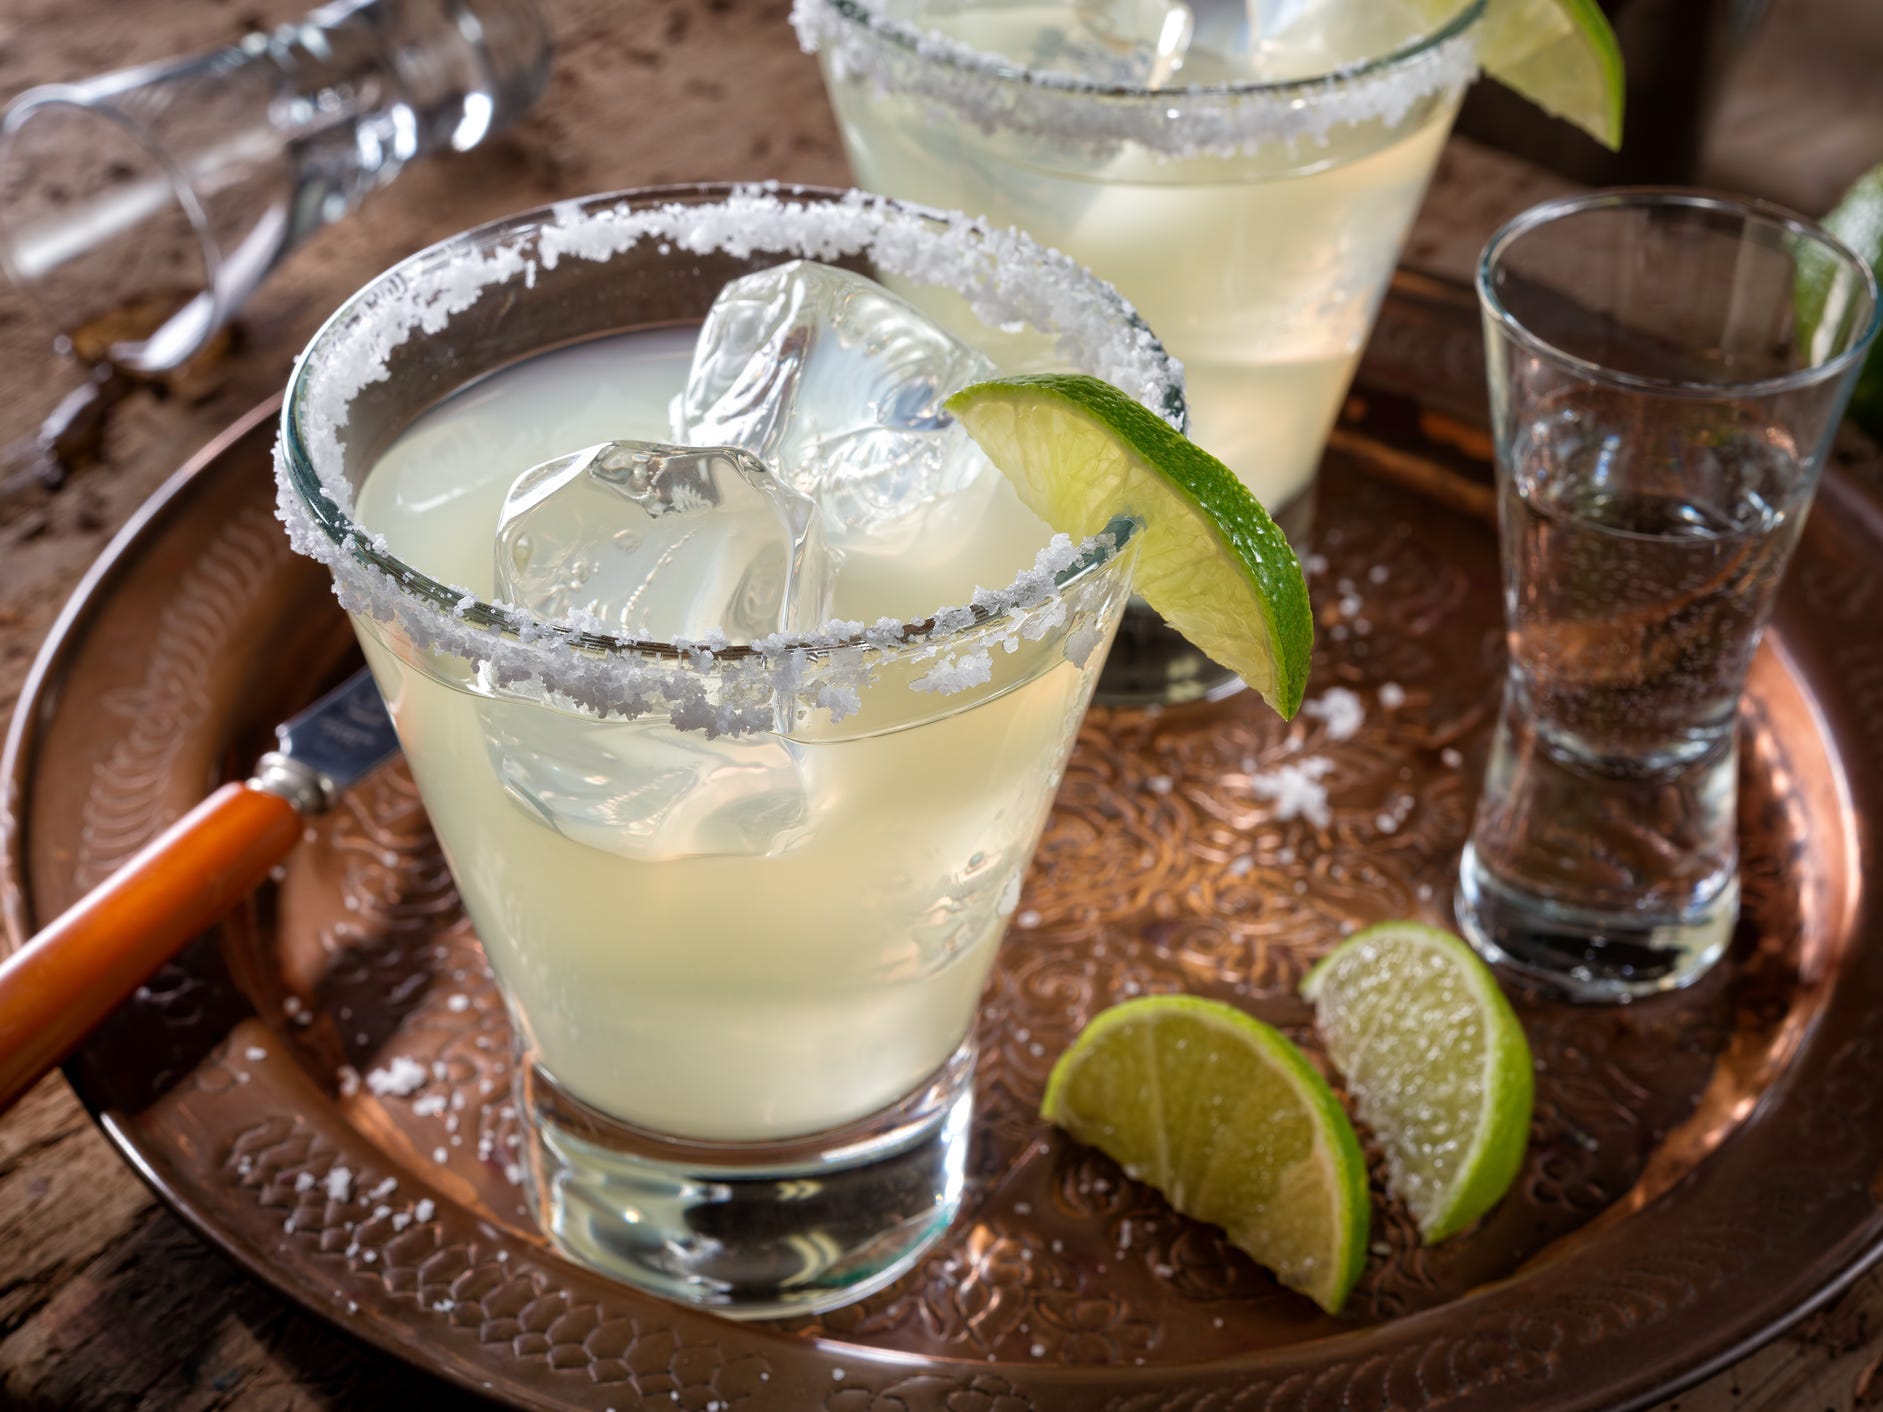 A margarita on the rocks with a salted rim, garnished with a lime wedge